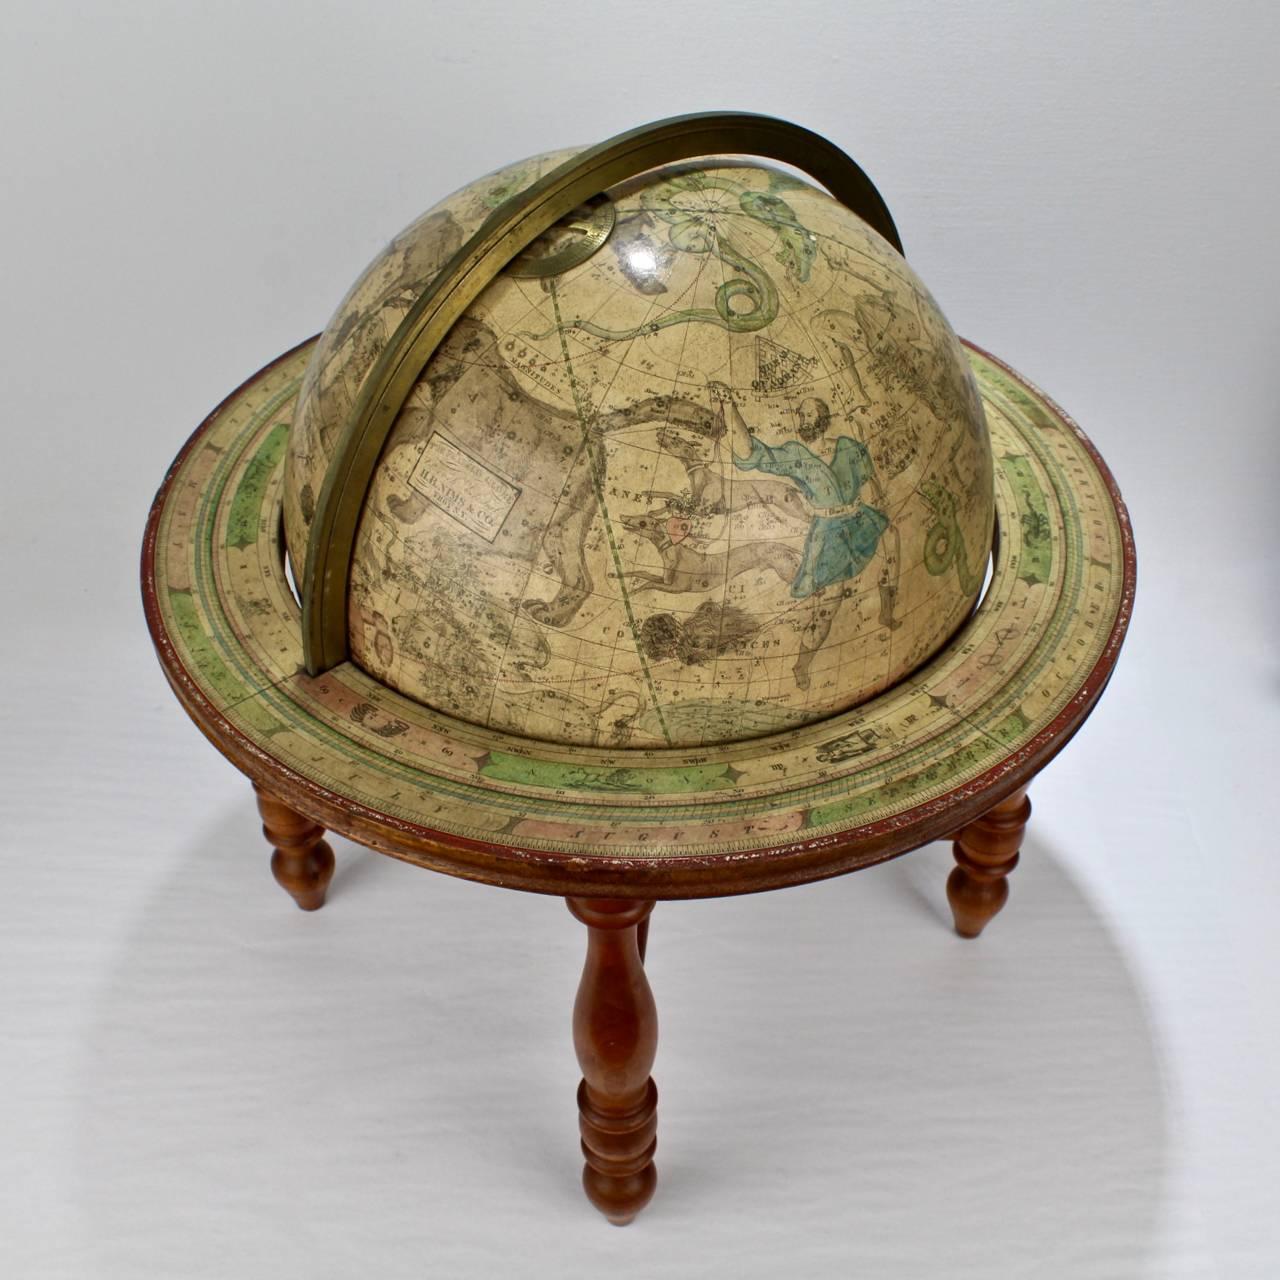 The Franklin Globe. 

A fine and rare H. B. Nims and Company 12-inch Celestial globe.

Manufactured in Troy, New York. 

With 12 printed and hand tinted gores on a plaster sphere, a graduated brass meridian circles and a printed and